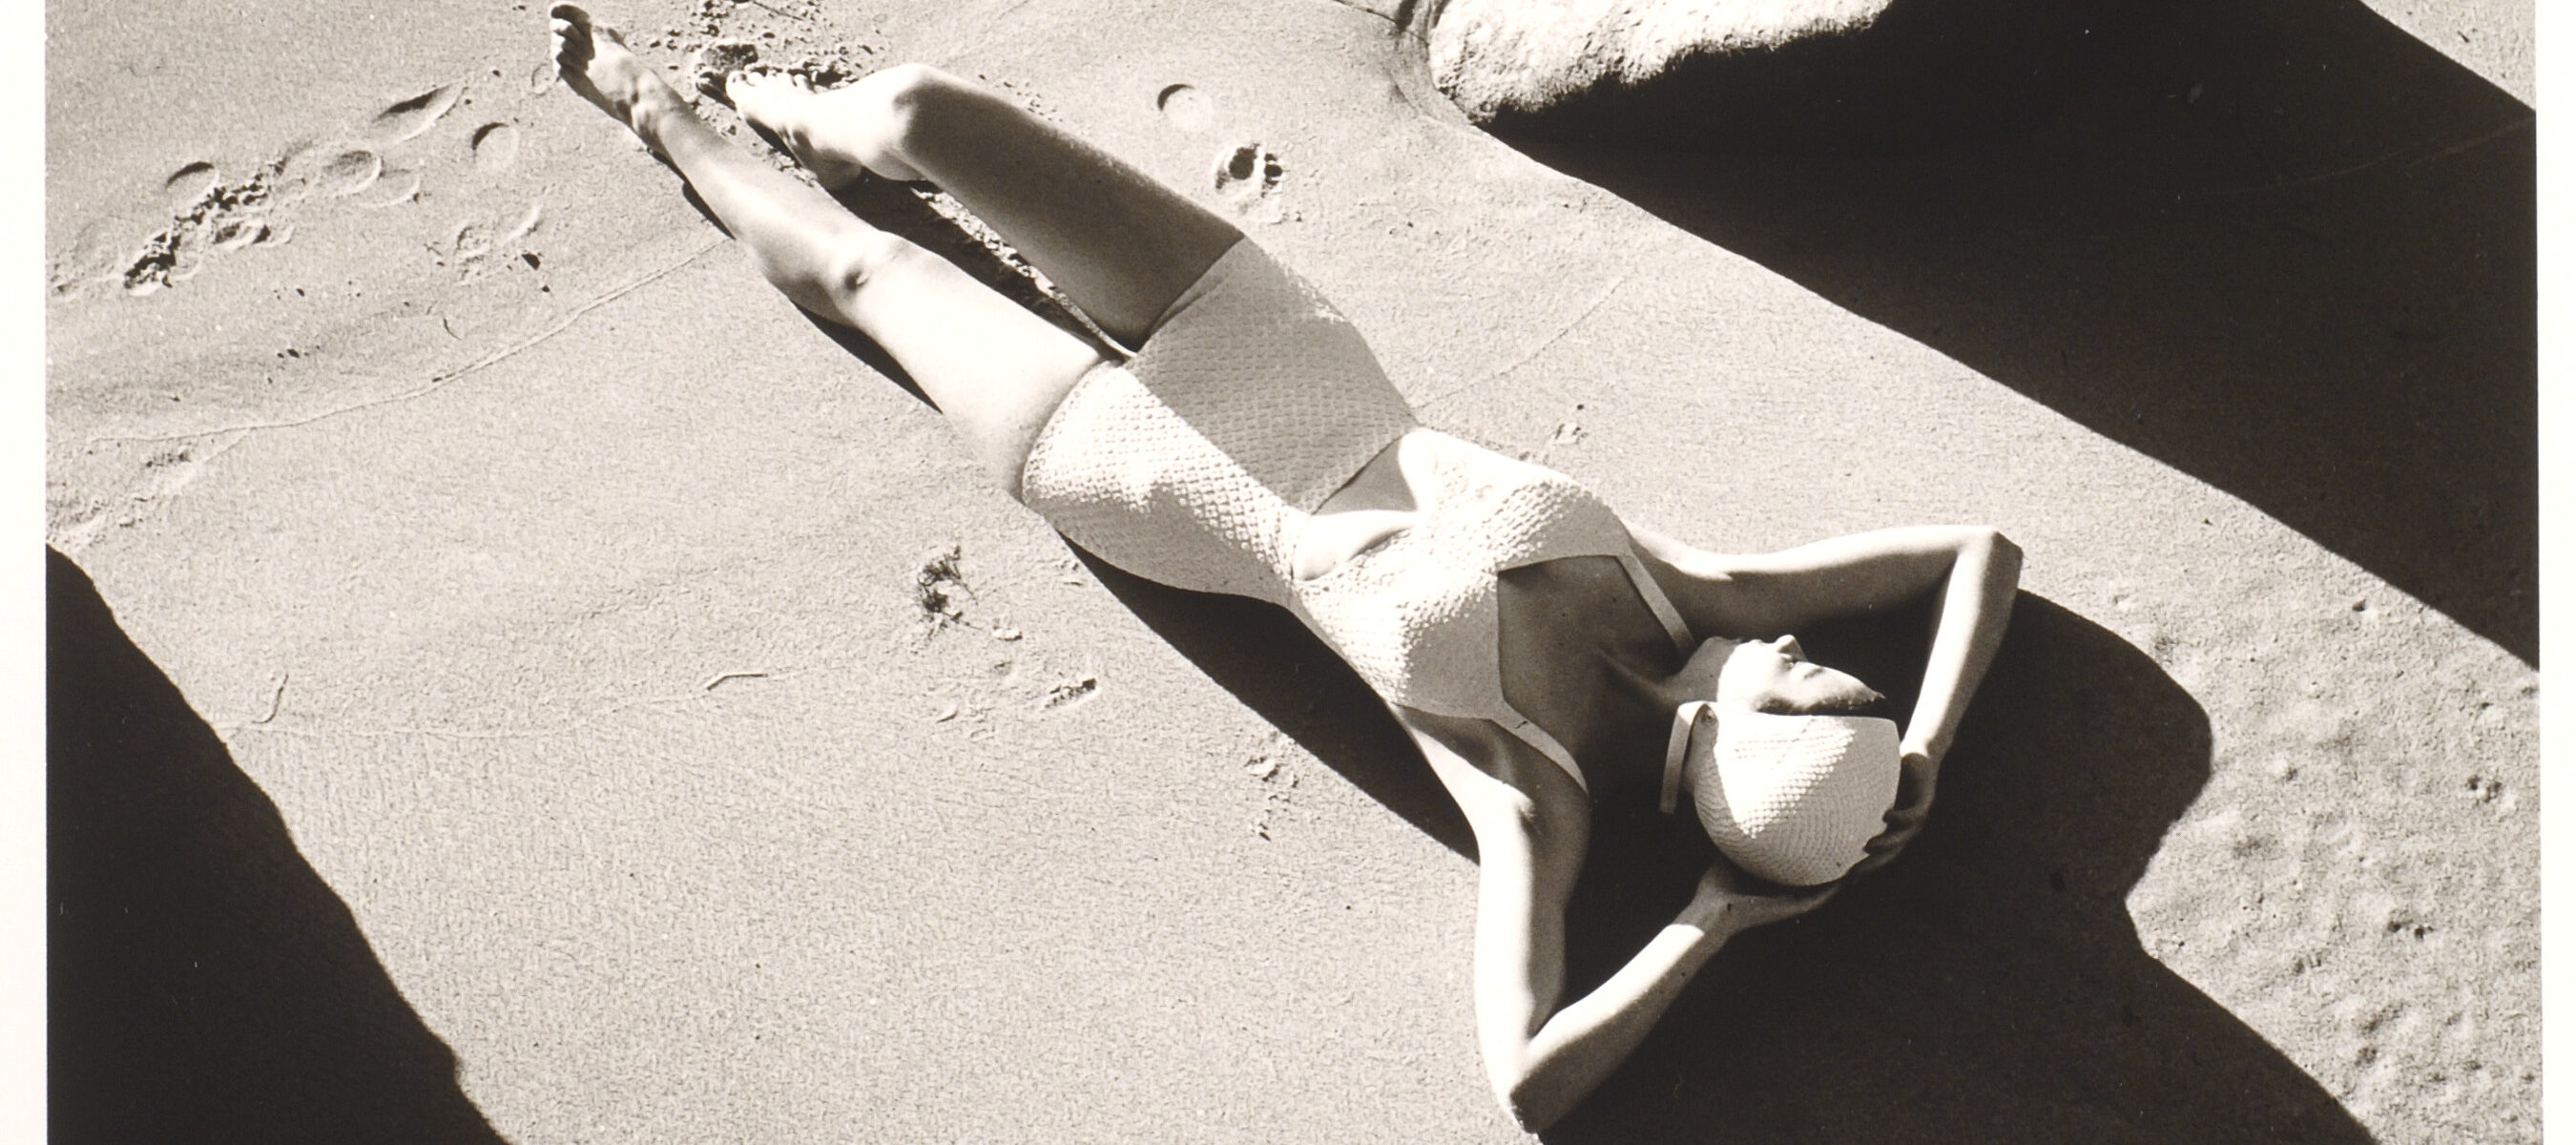 A black and white photograph of a light-skinned woman wearing a one-piece white bathing suit and white swim cap. She is lying down on sand with her hands behind her head. There are footprints in the sand below her, and the image is framed by large rocks.